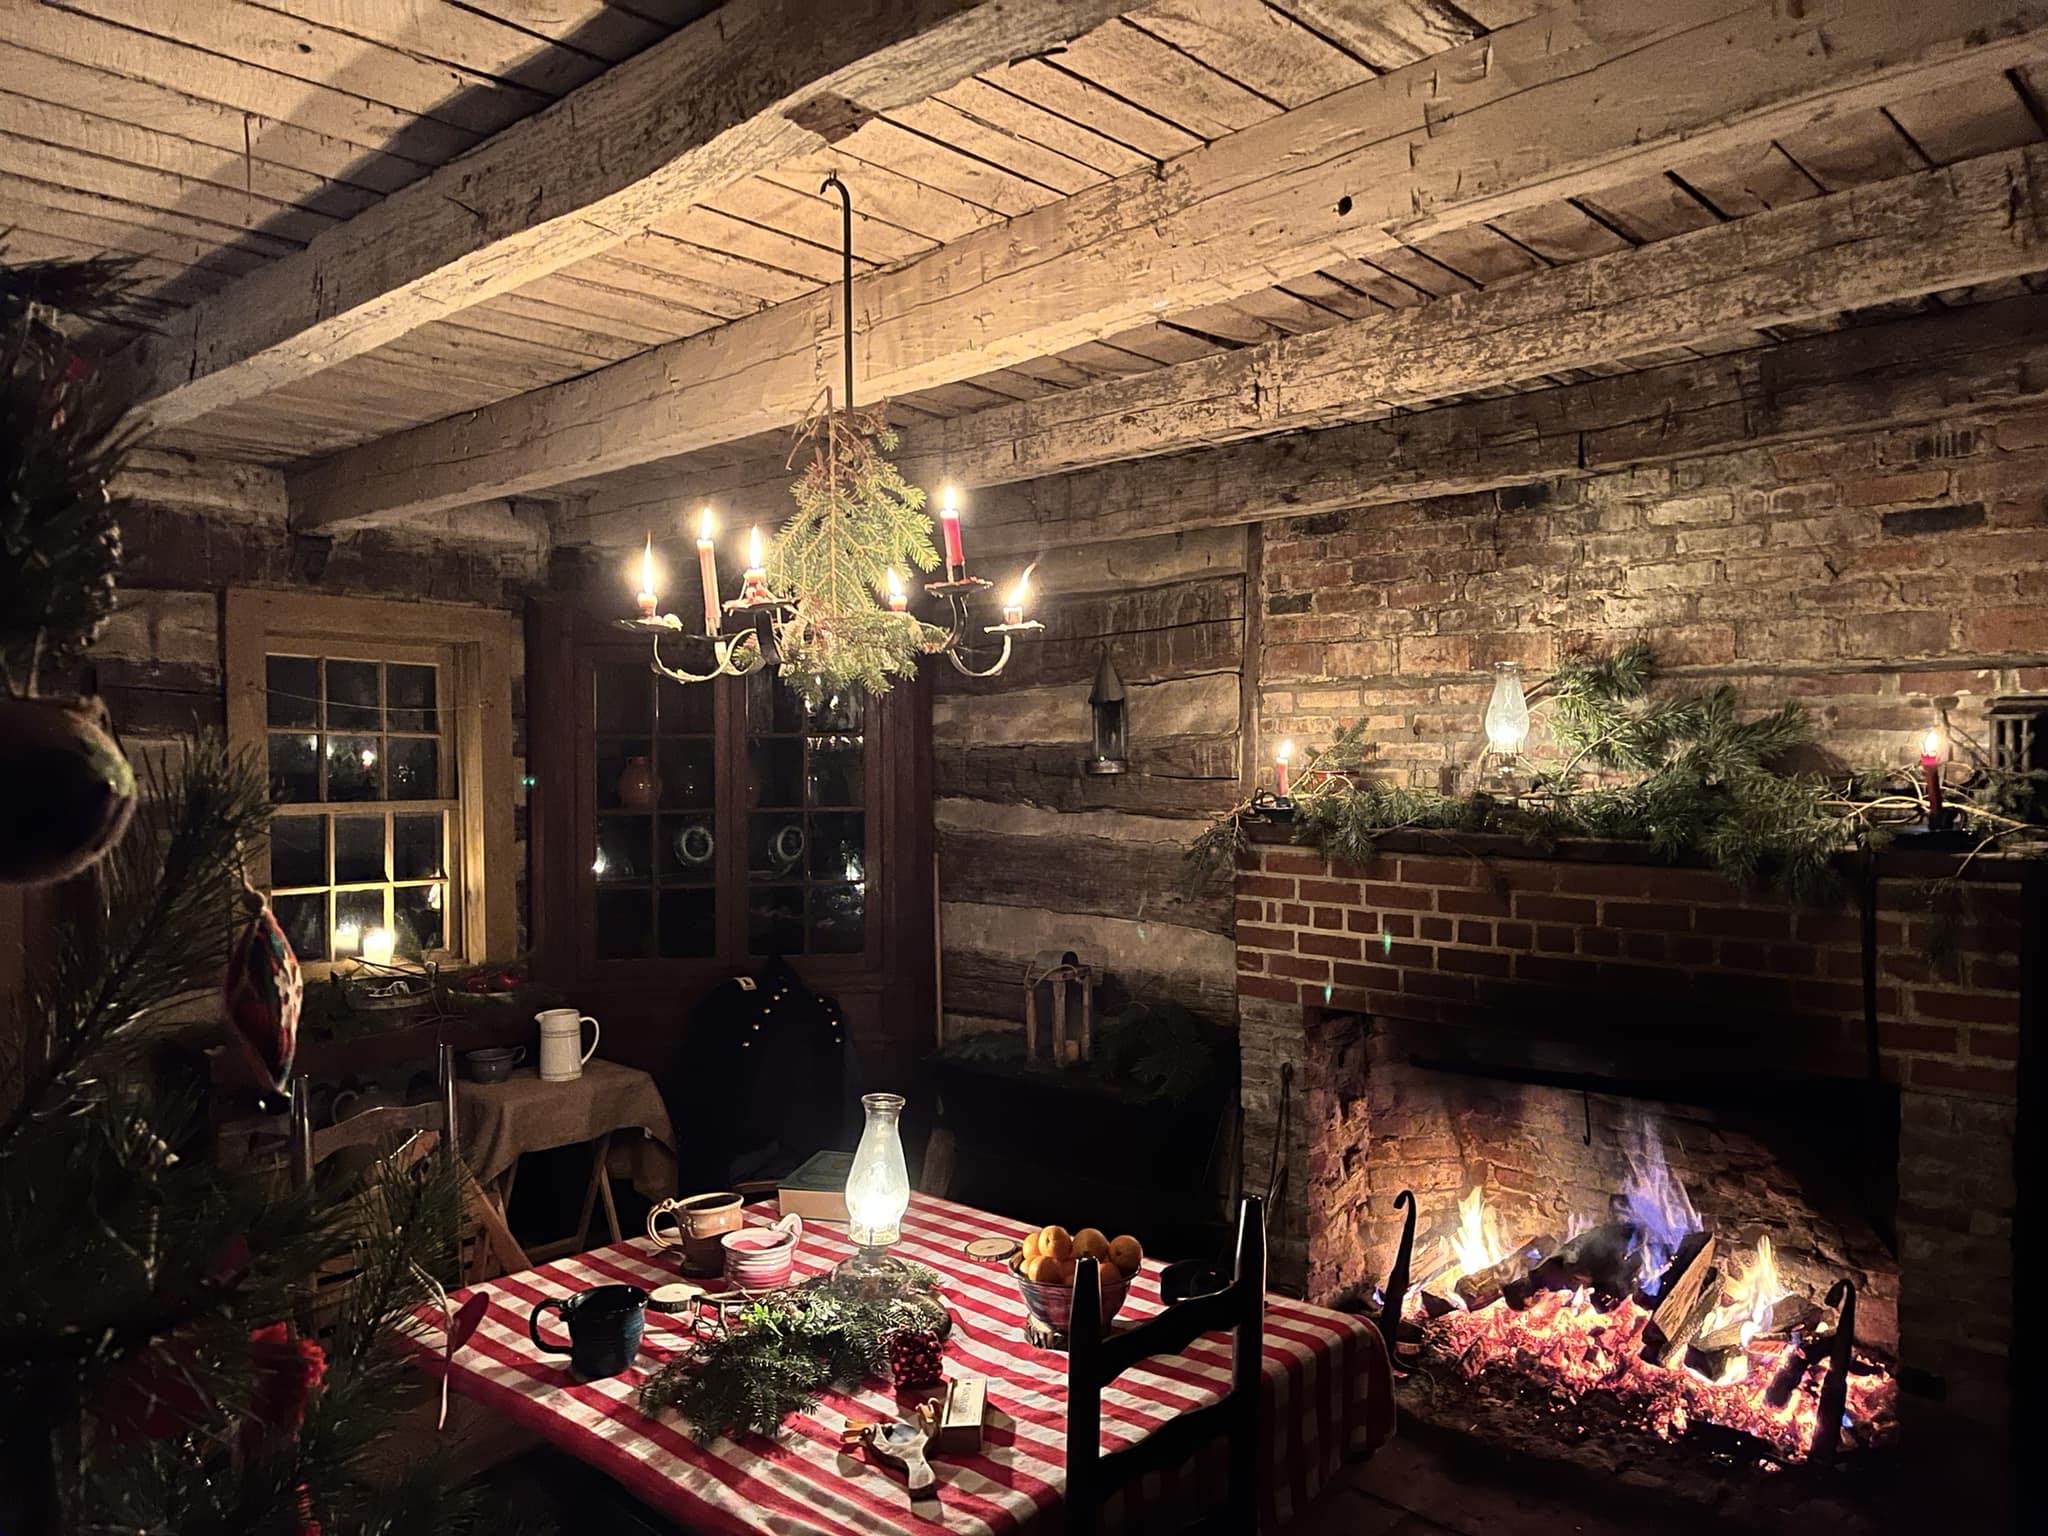 Candlelit Christmas at the Old Bedford Village - Bedford County